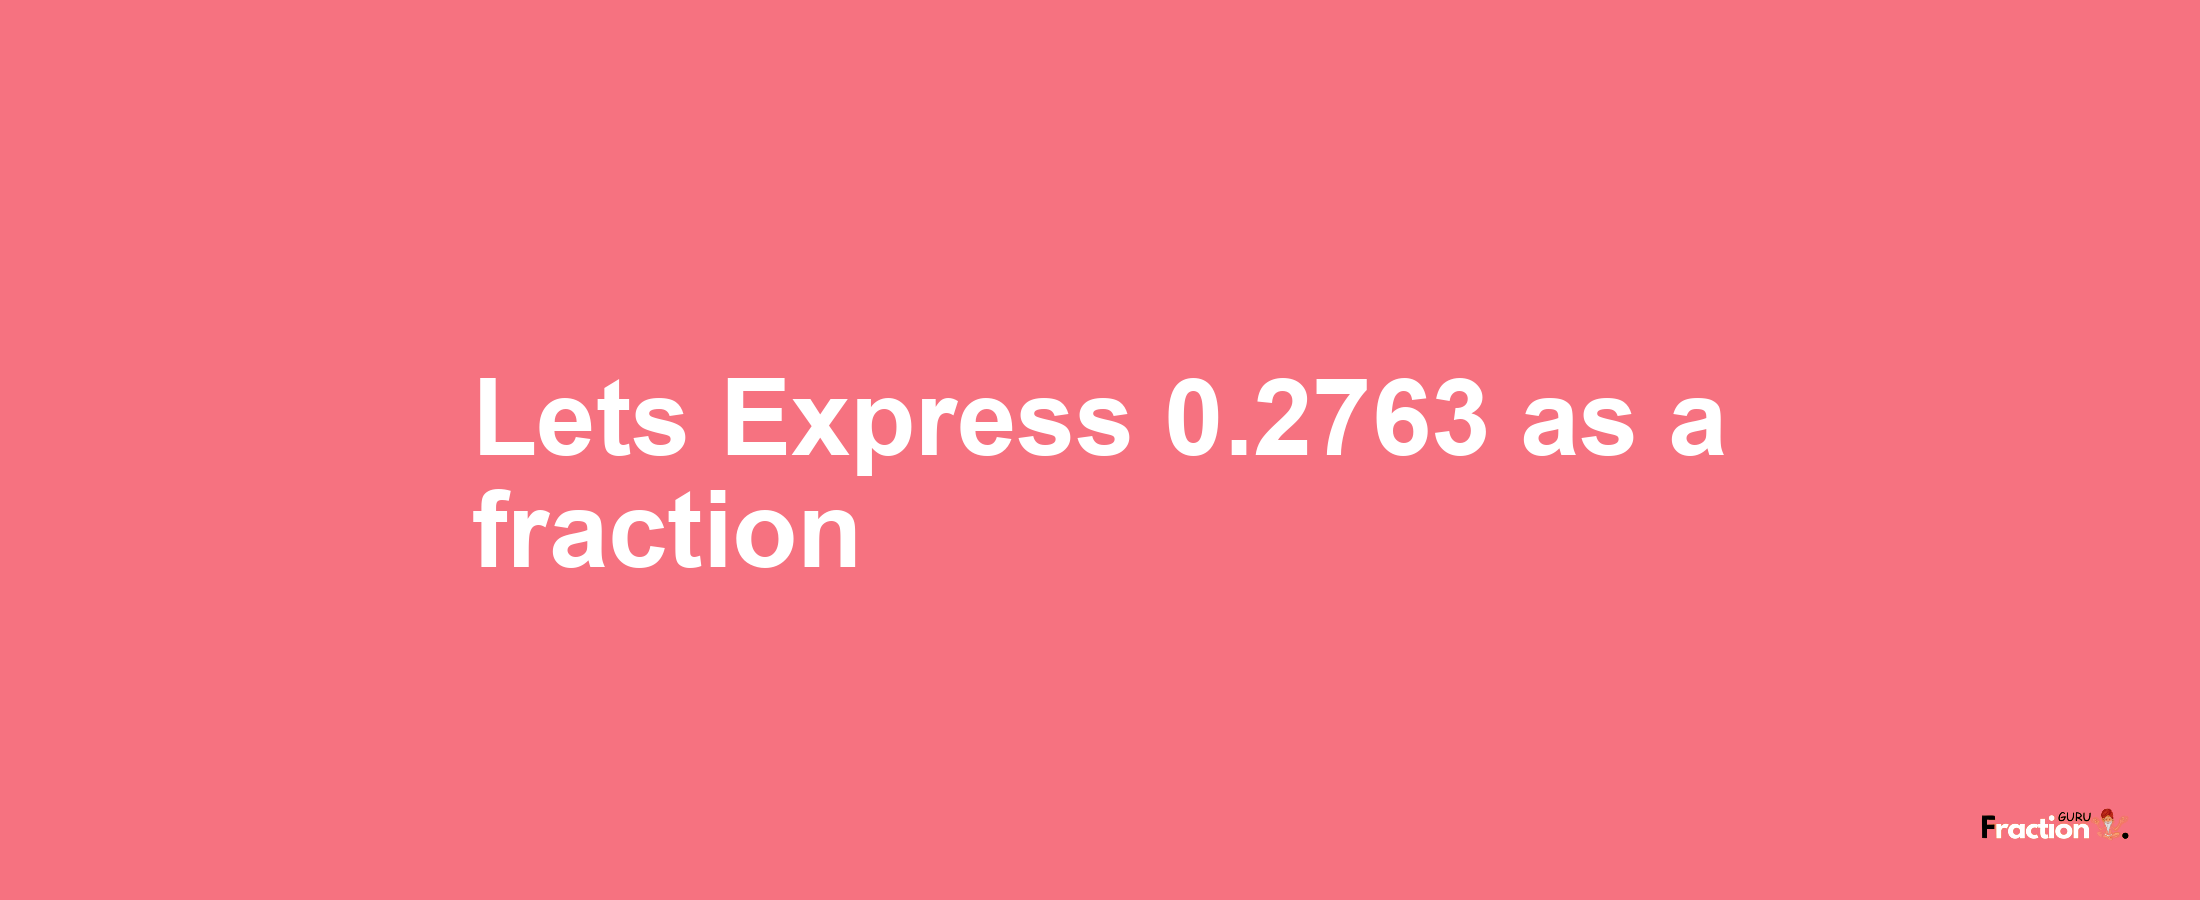 Lets Express 0.2763 as afraction